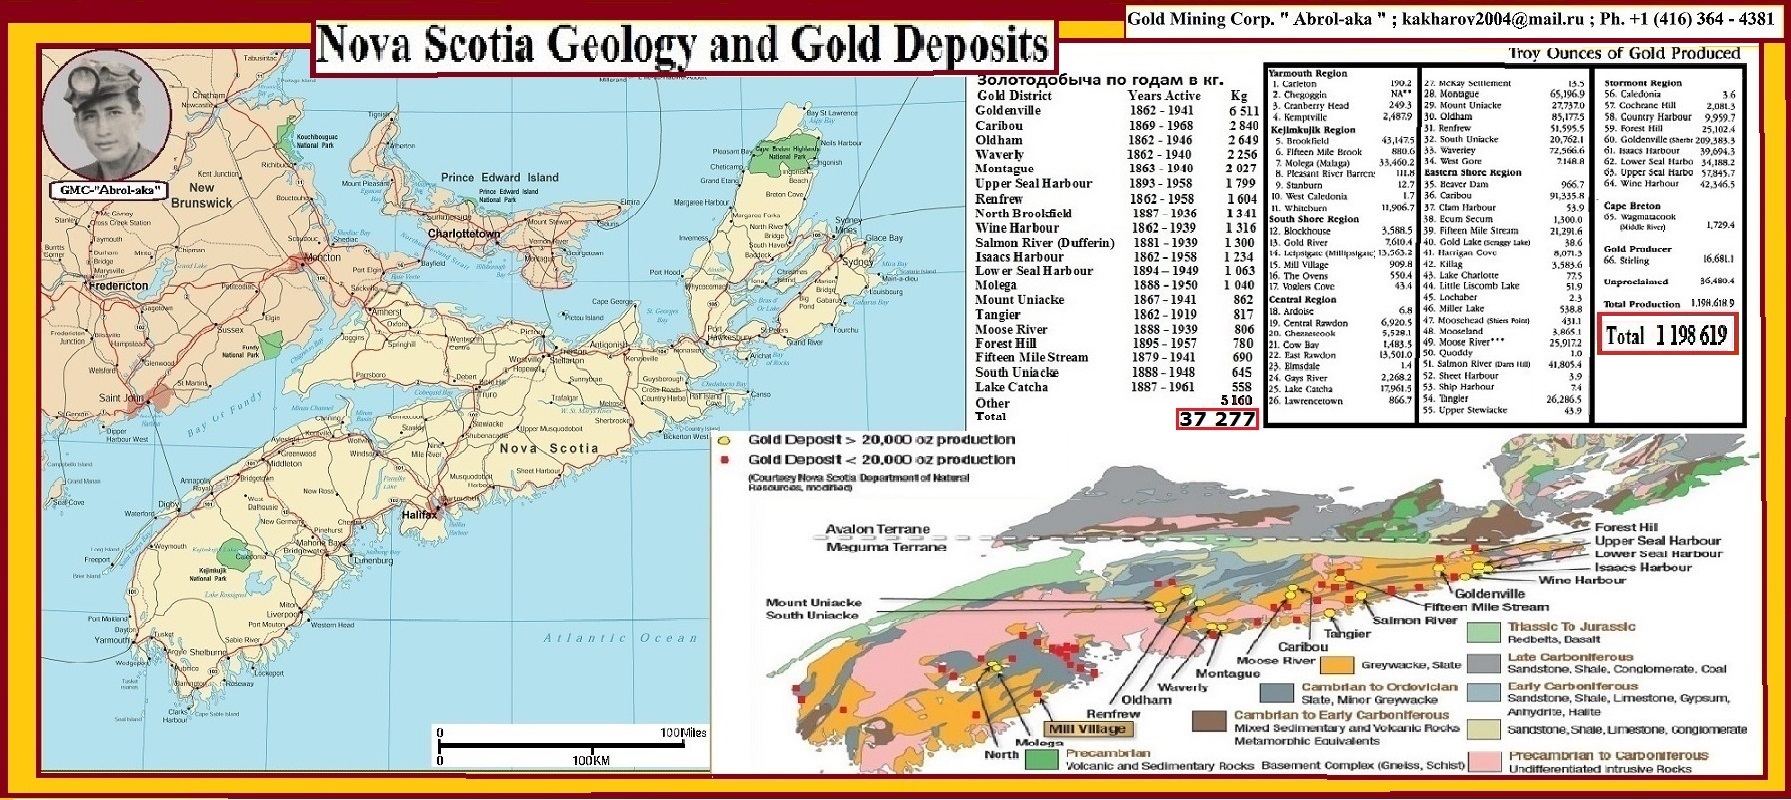 Gold Mining of The World [ ]